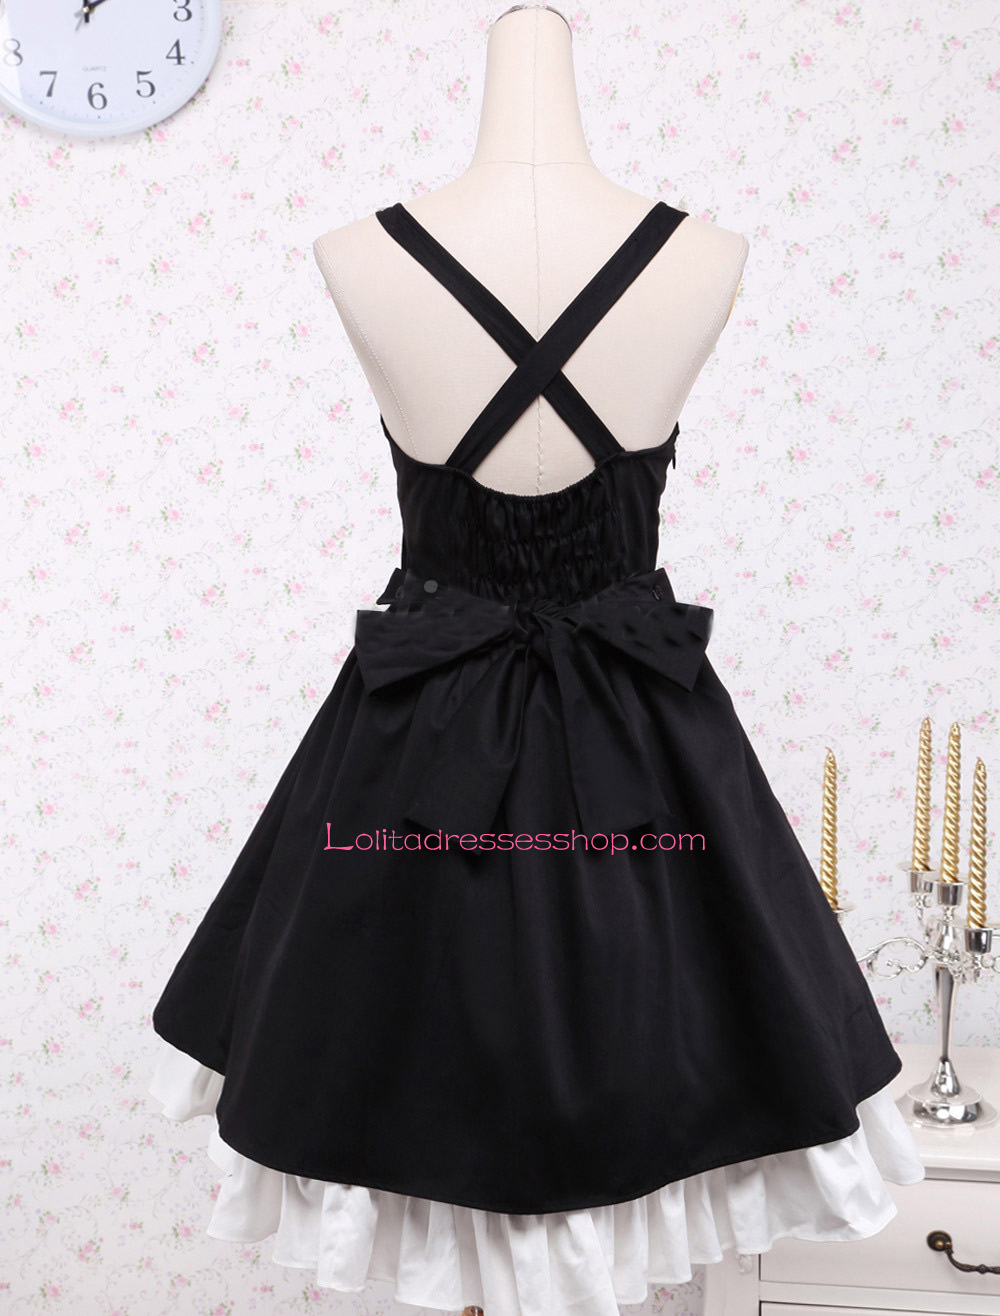 Black and White Straps Sleeveless Flouncing with Bow Gothic Lolita Dress